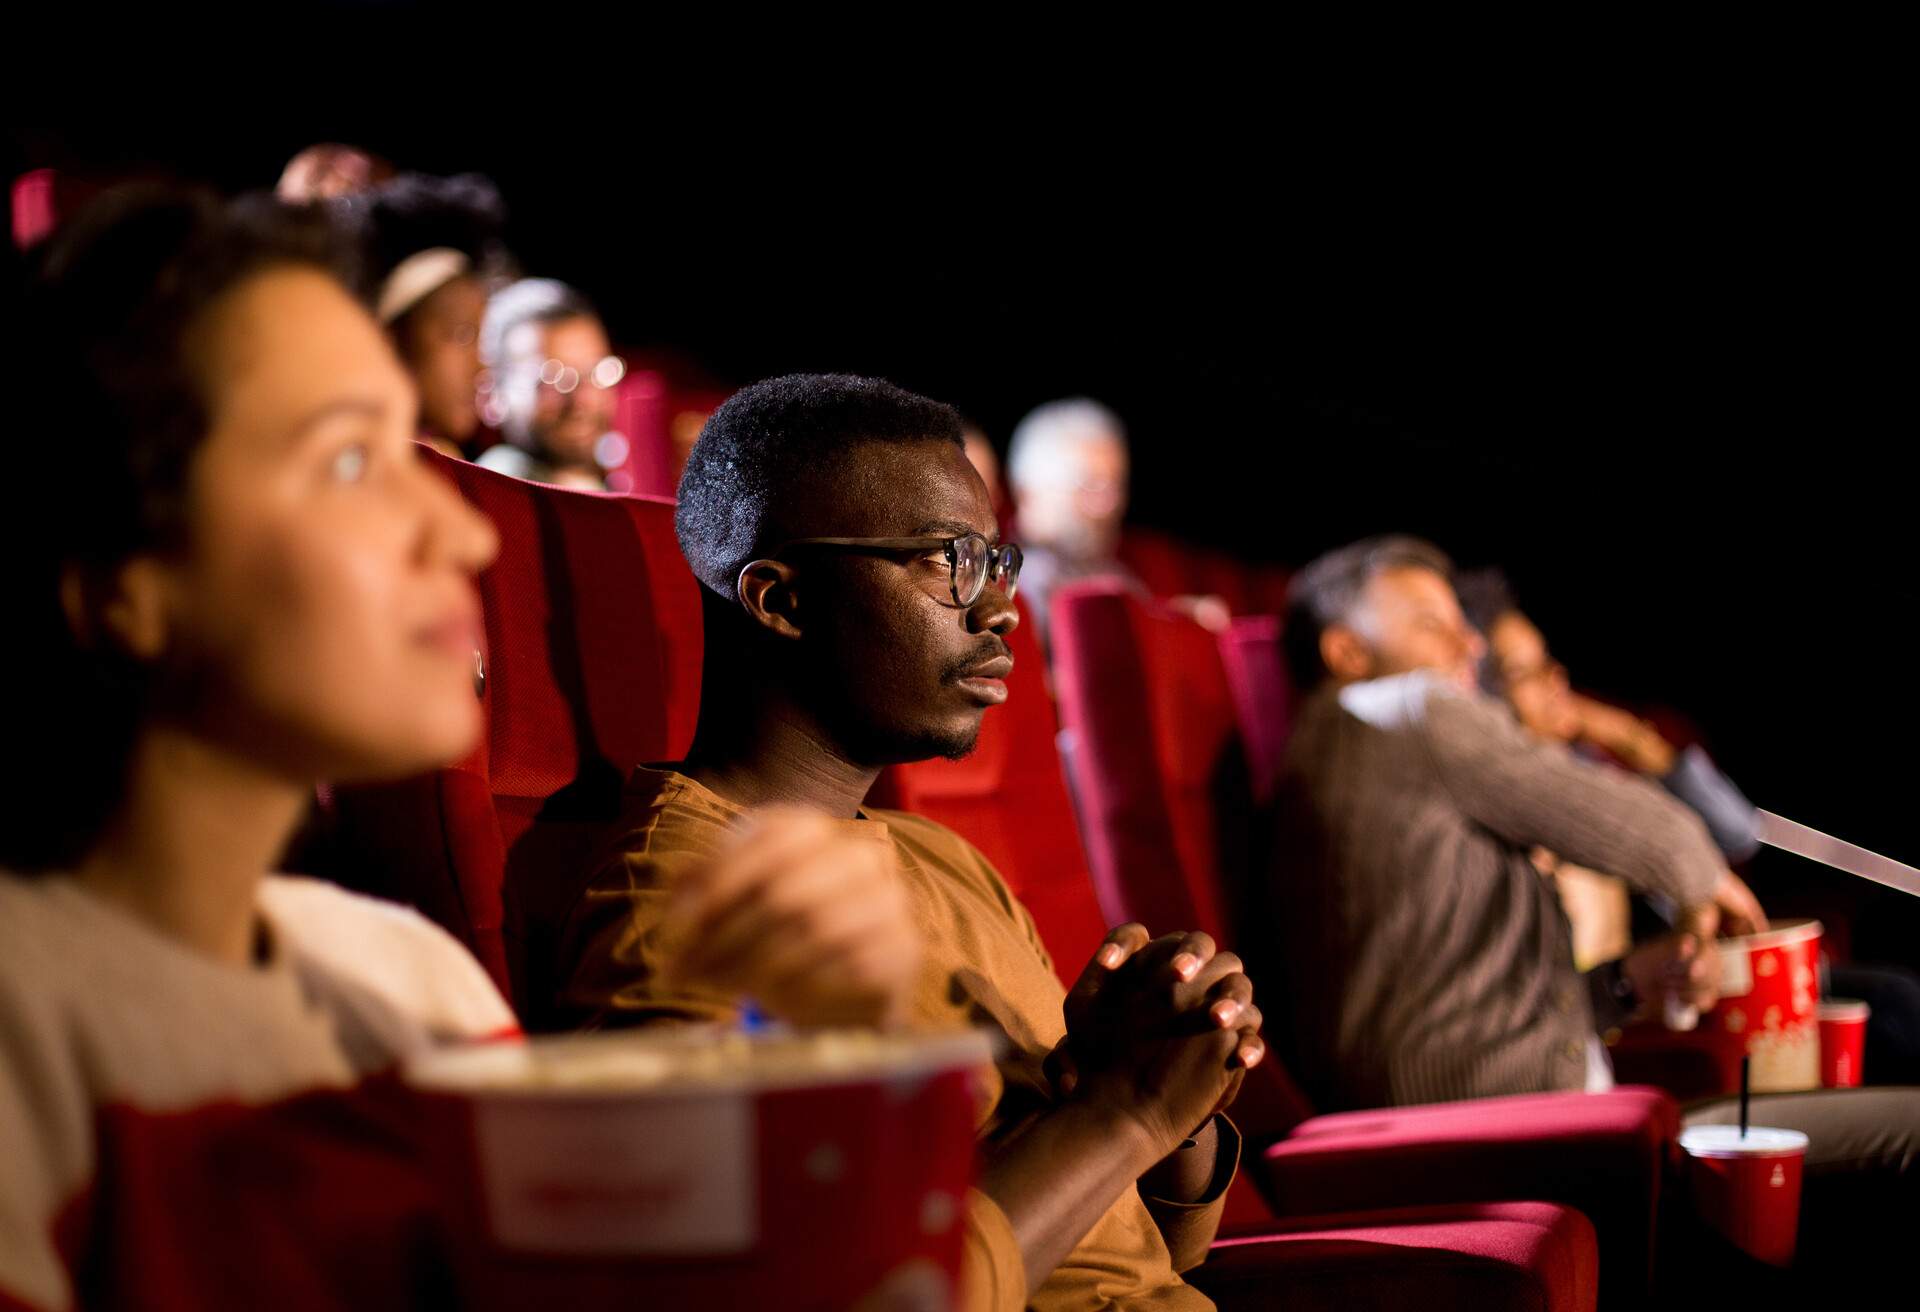 An African-American man fully immerses himself in the cinematic experience, eyes fixed on the screen, his delighted expression reflecting the enjoyment and escape that movies can provide.